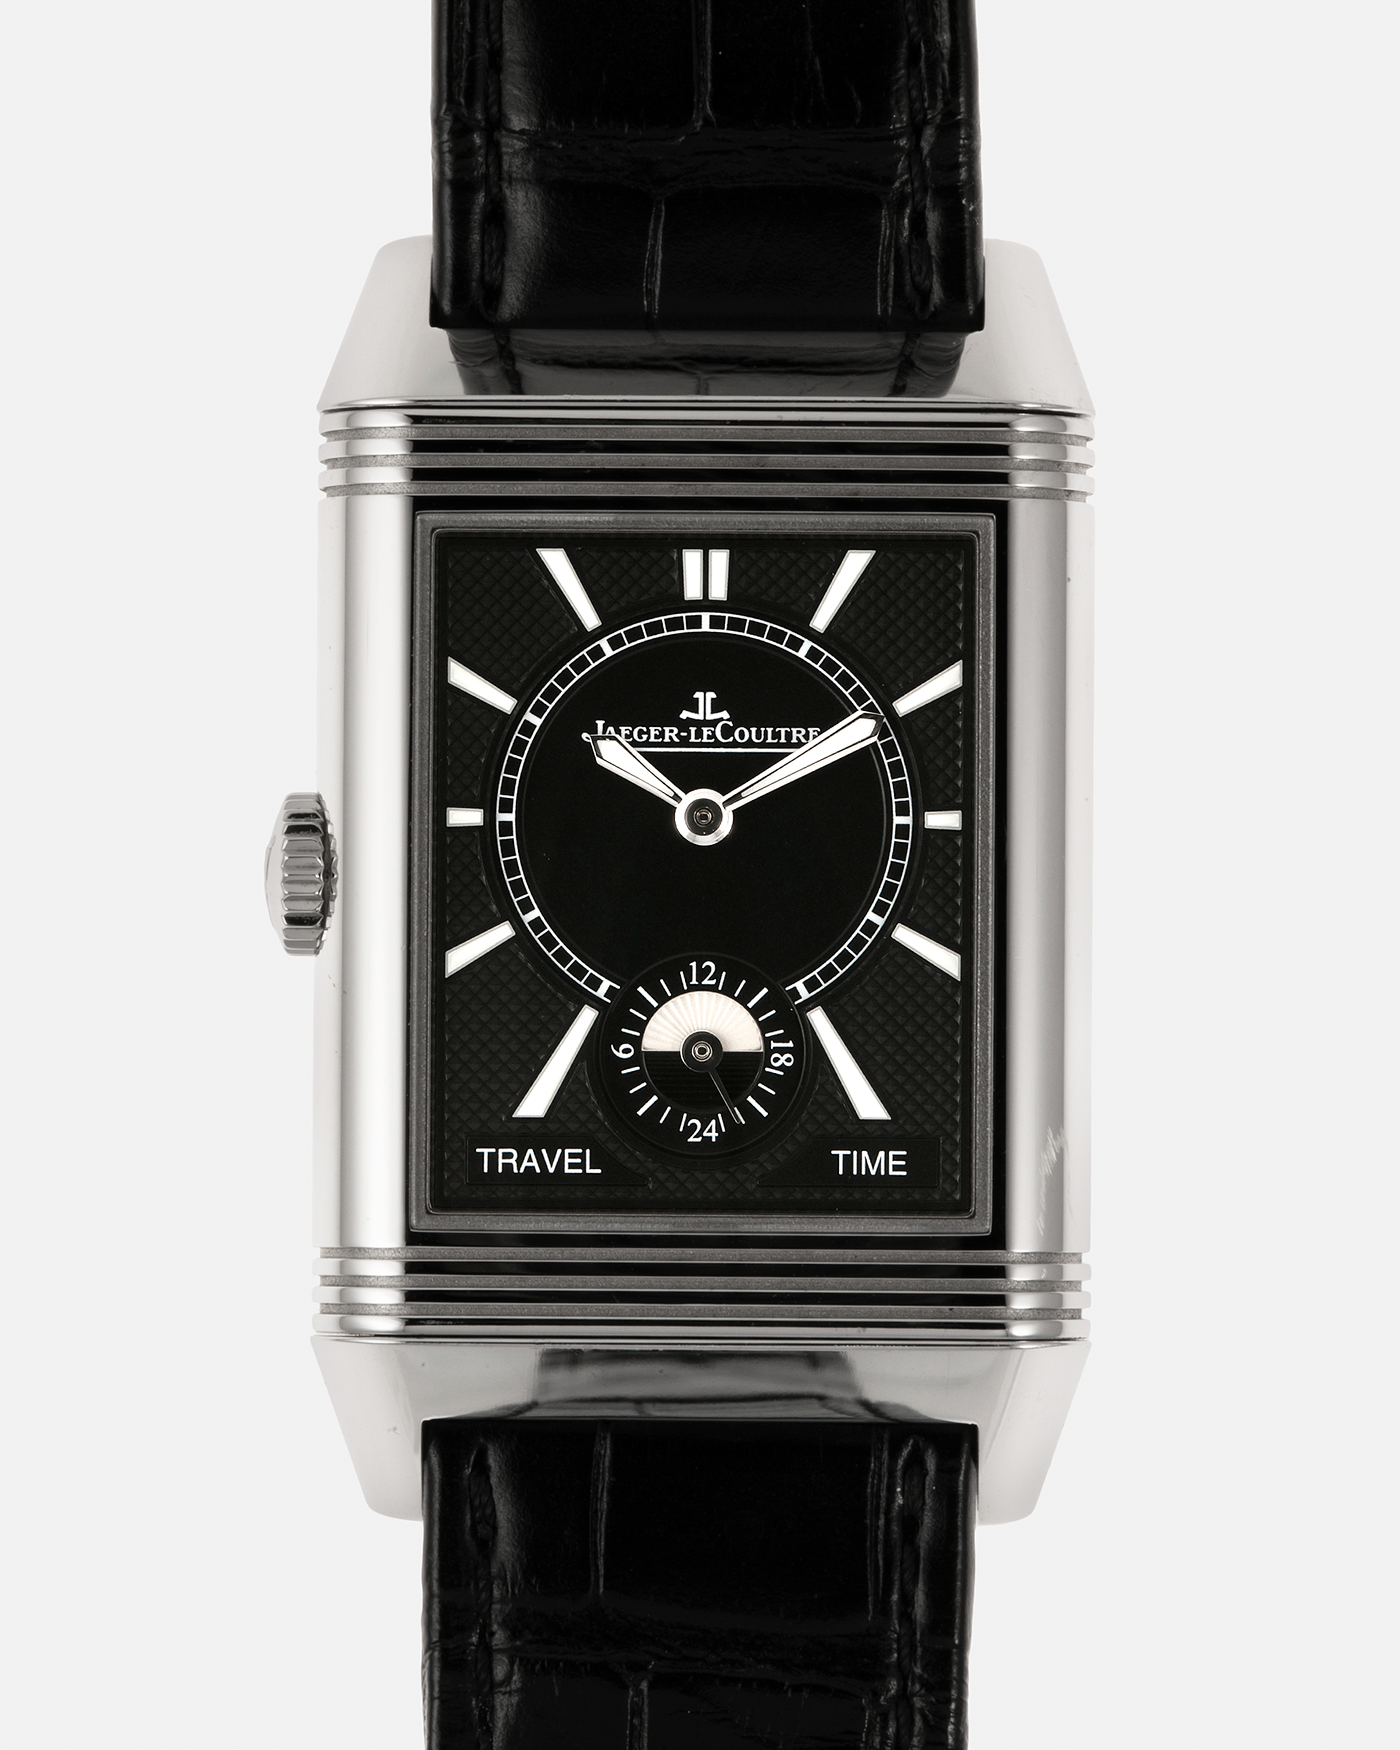 Brand: Jaeger LeCoultre Year: 2020 Model: Reverso Classic Large Duoface Q3848422 Reference Number: 215.8.D4 Material: Stainless Steel Movement: Jaeger LeCoultre Cal. 854A/2, Manual-Wind Case Dimensions: 47mm x 28.3mm x 10.3mm Lug Width: 20mm Strap: Jaeger LeCoultre Case Black Alligator Leather Strap with Signed Stainless Steel Deployant Buckle